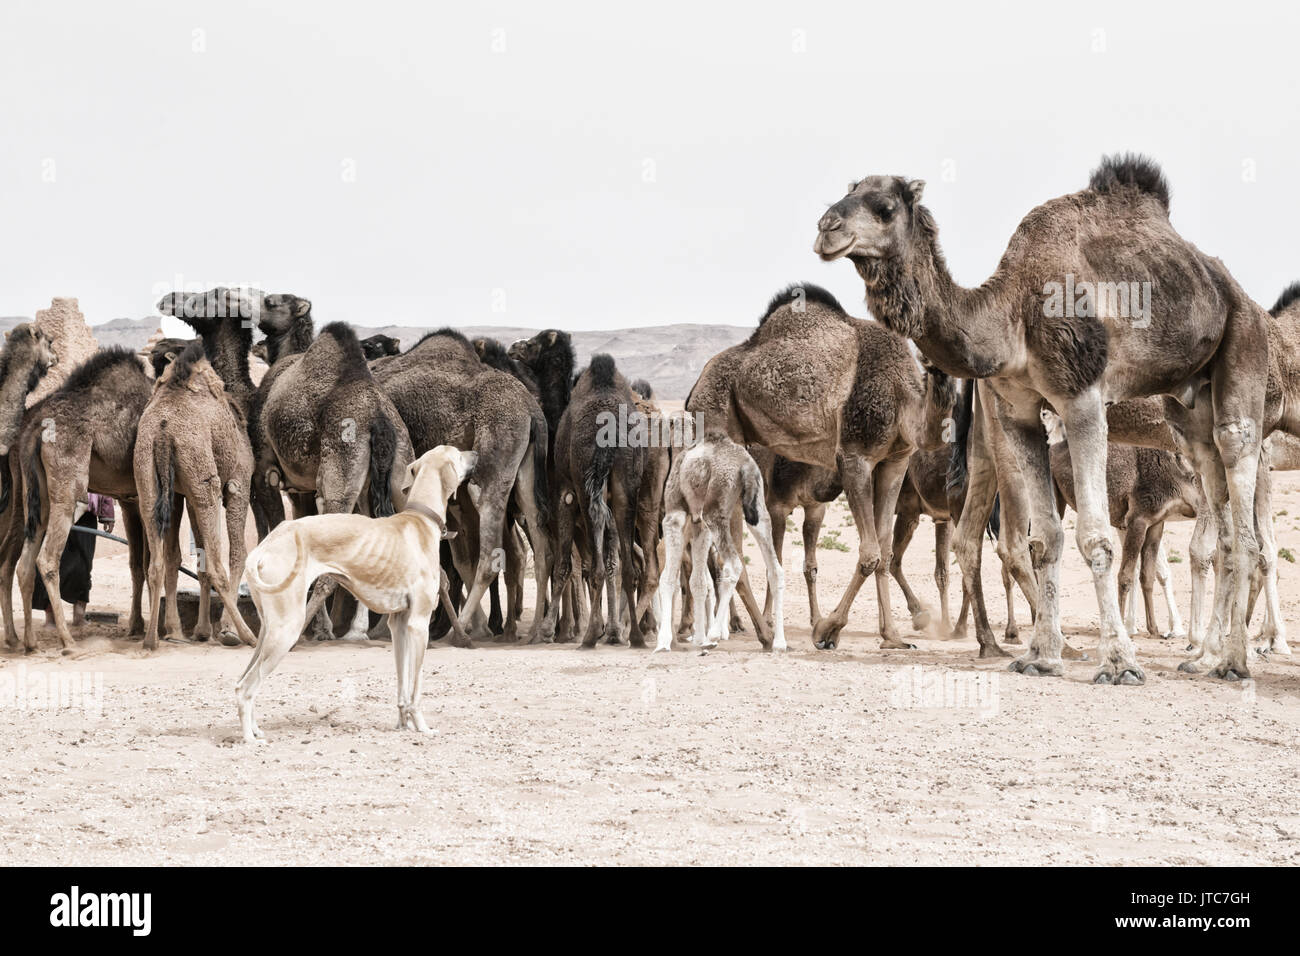 A Sloughi (Arabian greyhound) herds a group of dromedaries (camels) at a well in the desert of Morocco. Stock Photo